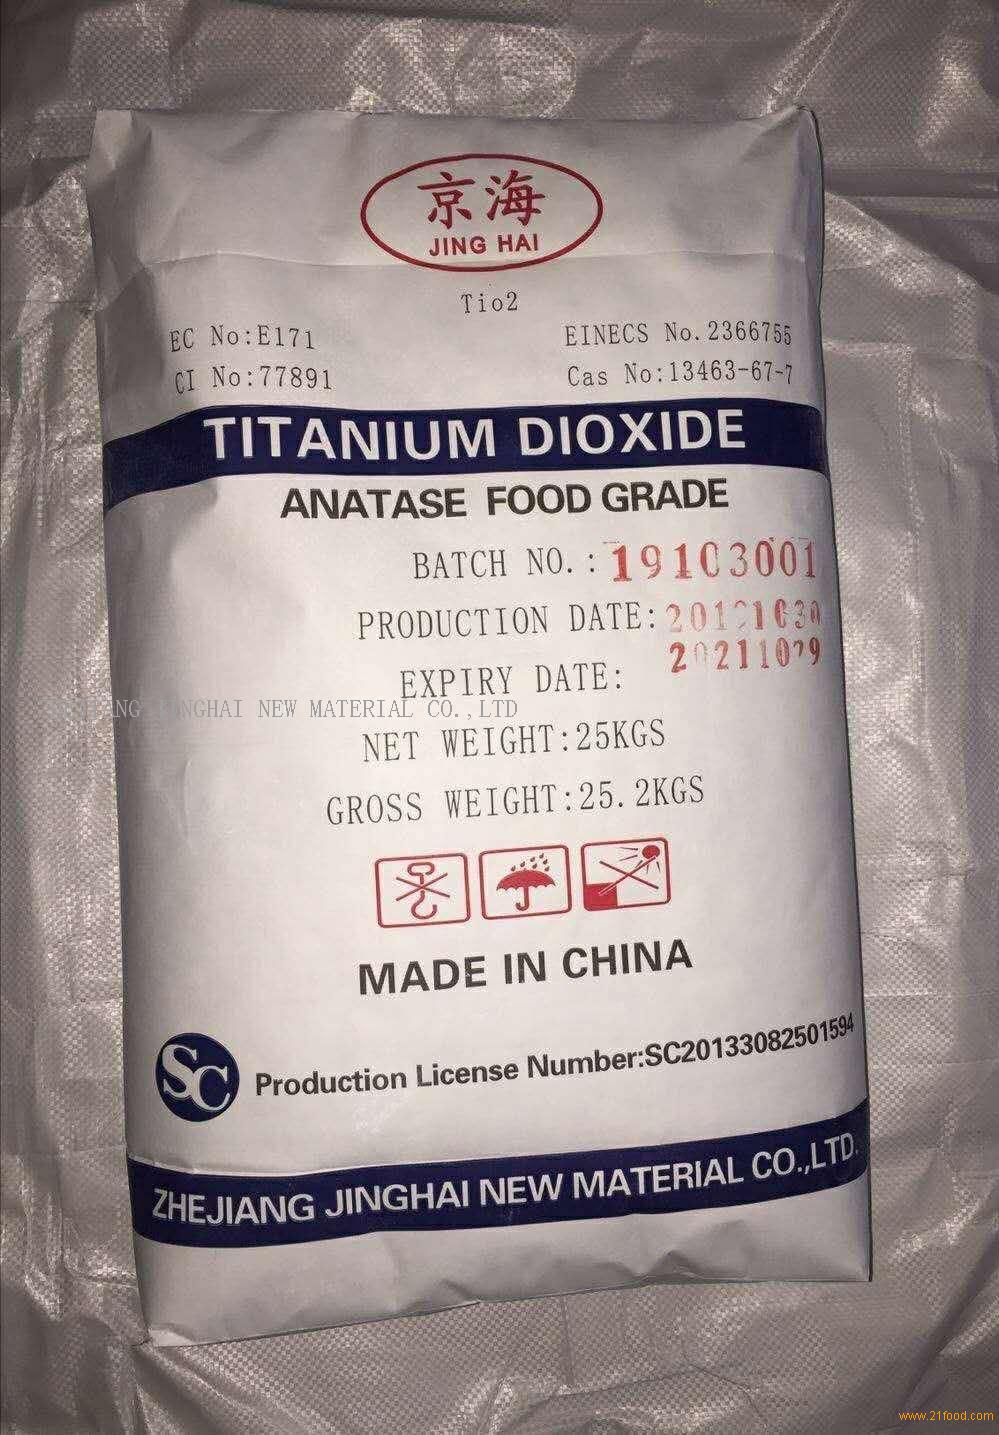 What Is Titanium Dioxide? – Food Insight